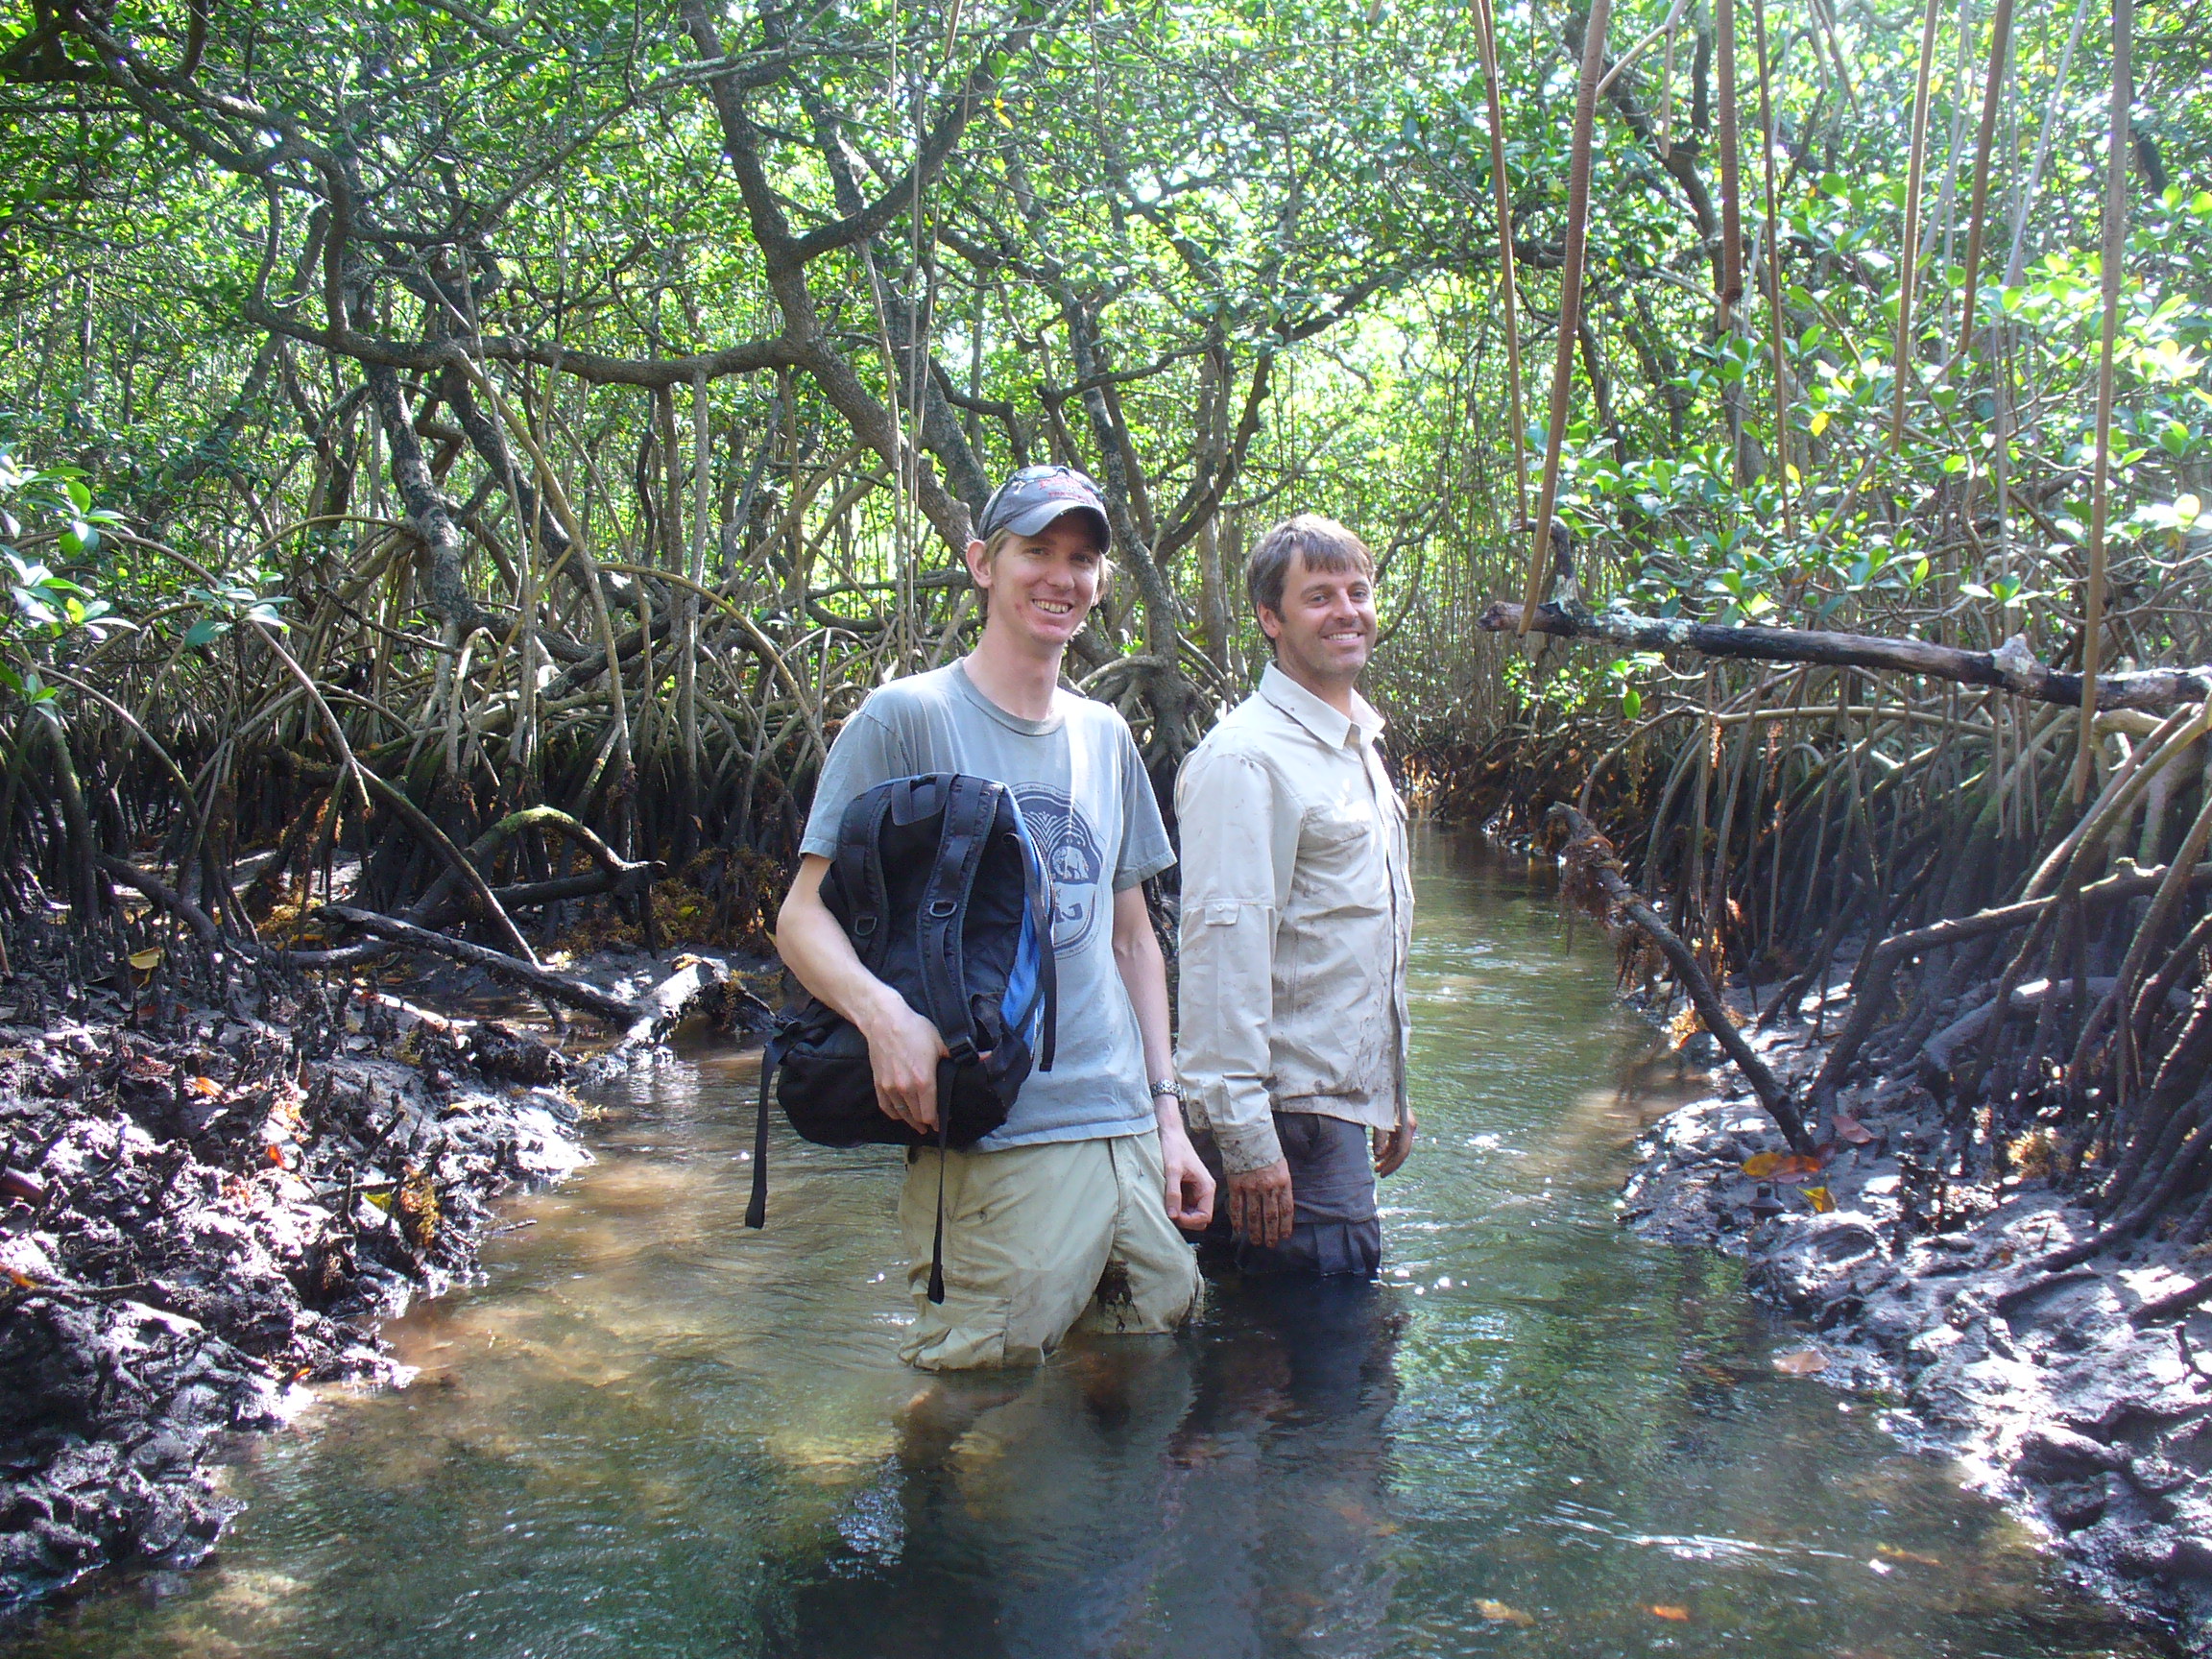 Professor Ben Horton (right) and a fellow scientist collecting field data for their research on the impacts of sea levels on mangroves (Source: Benjamin Horton/Earth Observatory of Singapore)